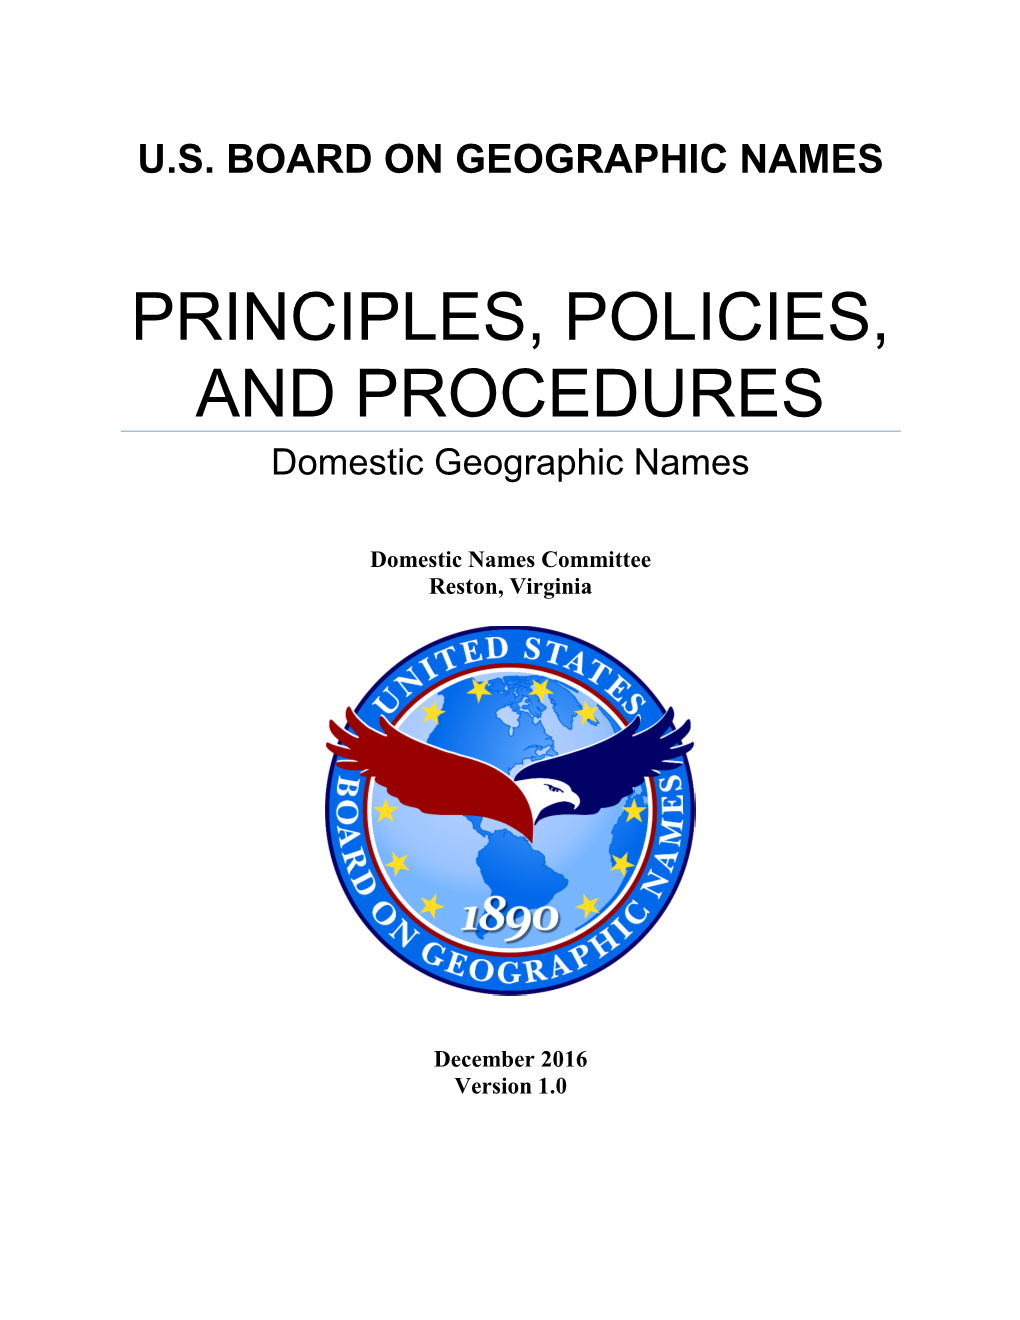 Principles, Policies, and Procedures: Domestic Geographic Names" Will Remain in Effect